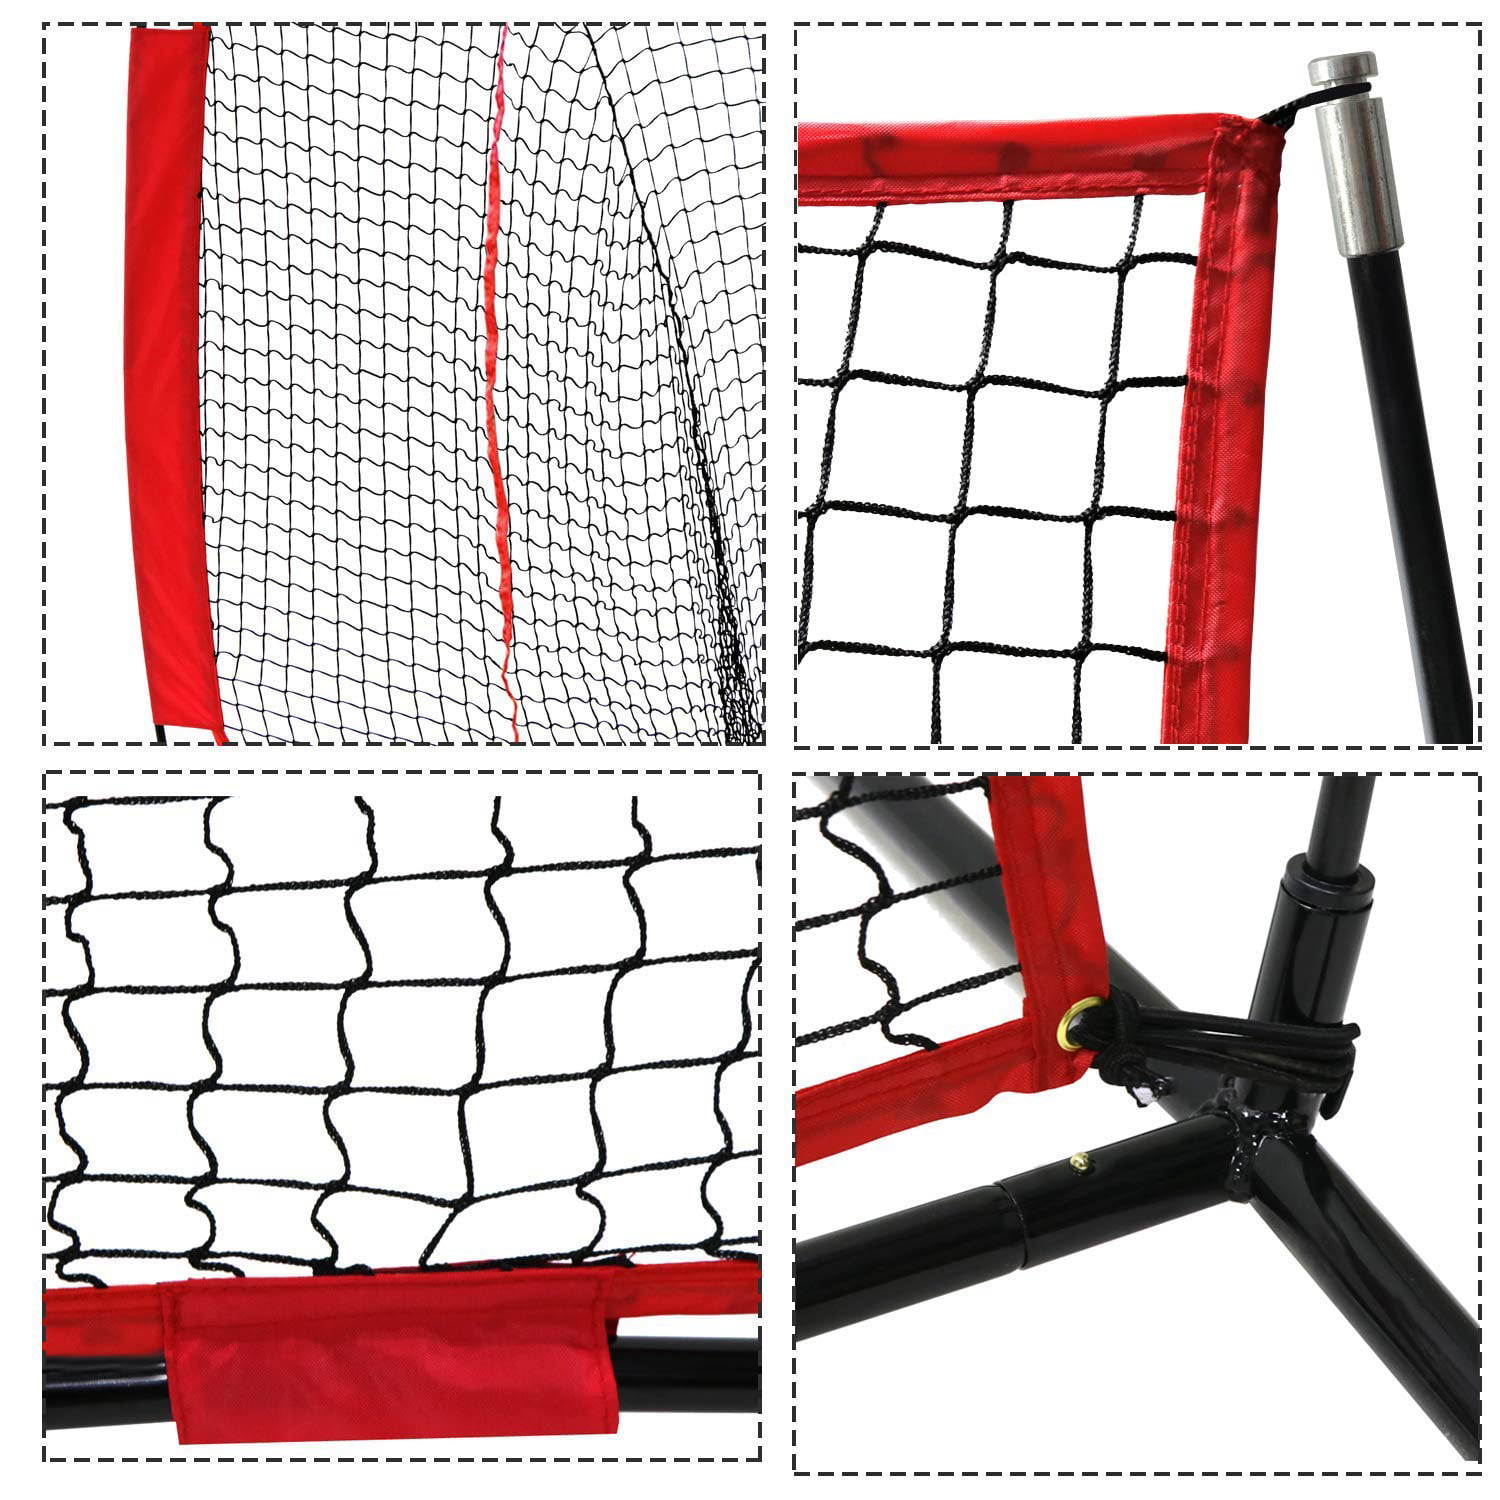 Red Baseball 7 x 7' Net Practice Hitting Pitching Batting and Catching with Bag